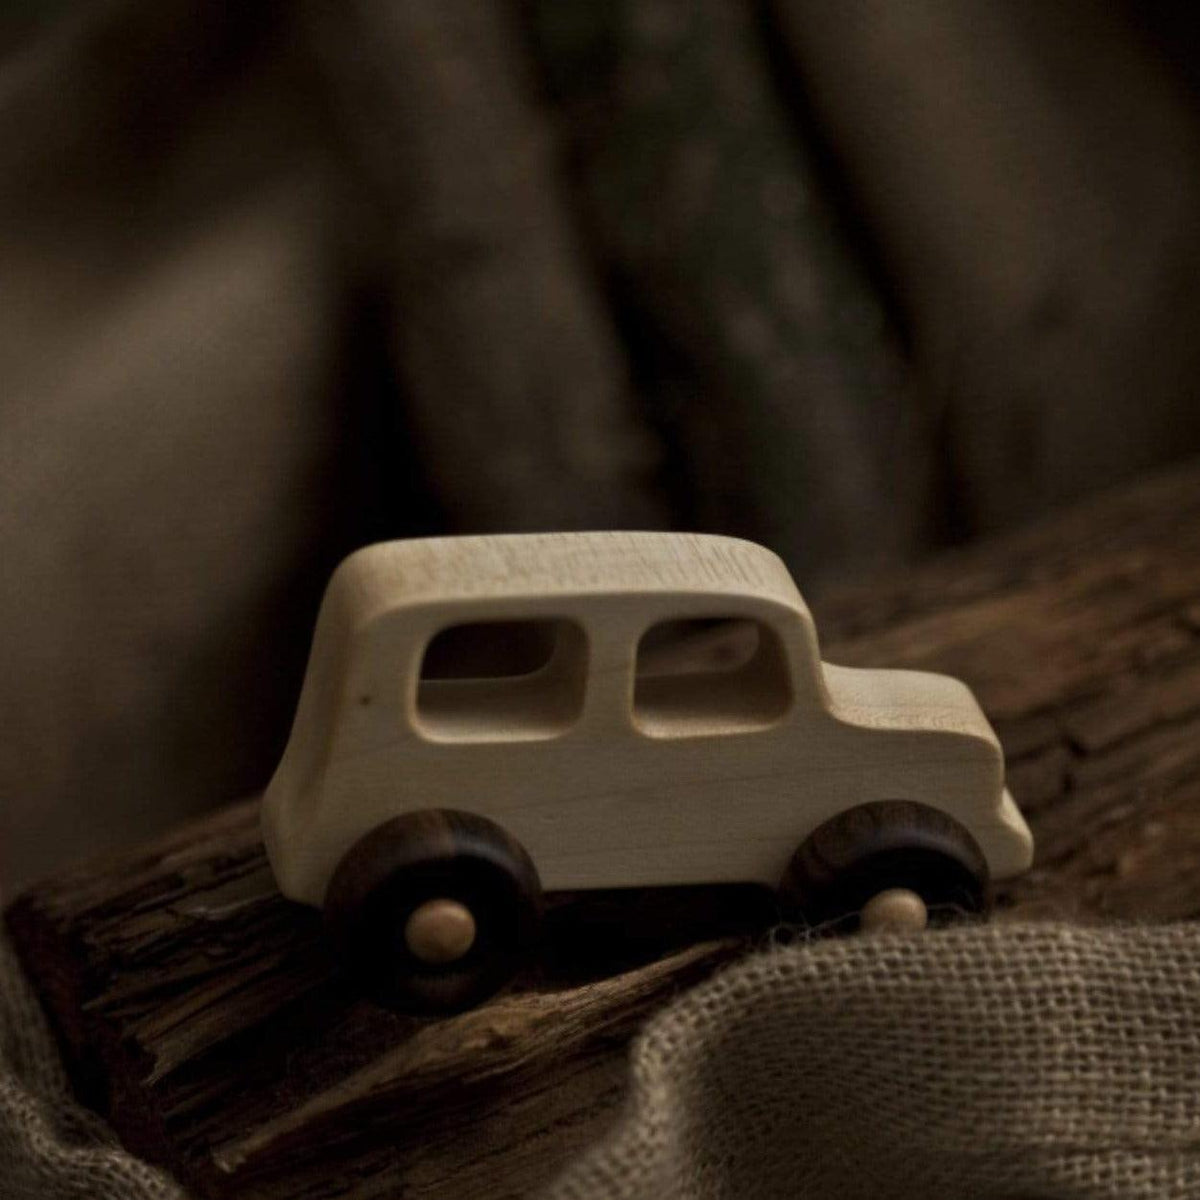 The Curated Parcel - Wooden Off Road Vehicle 